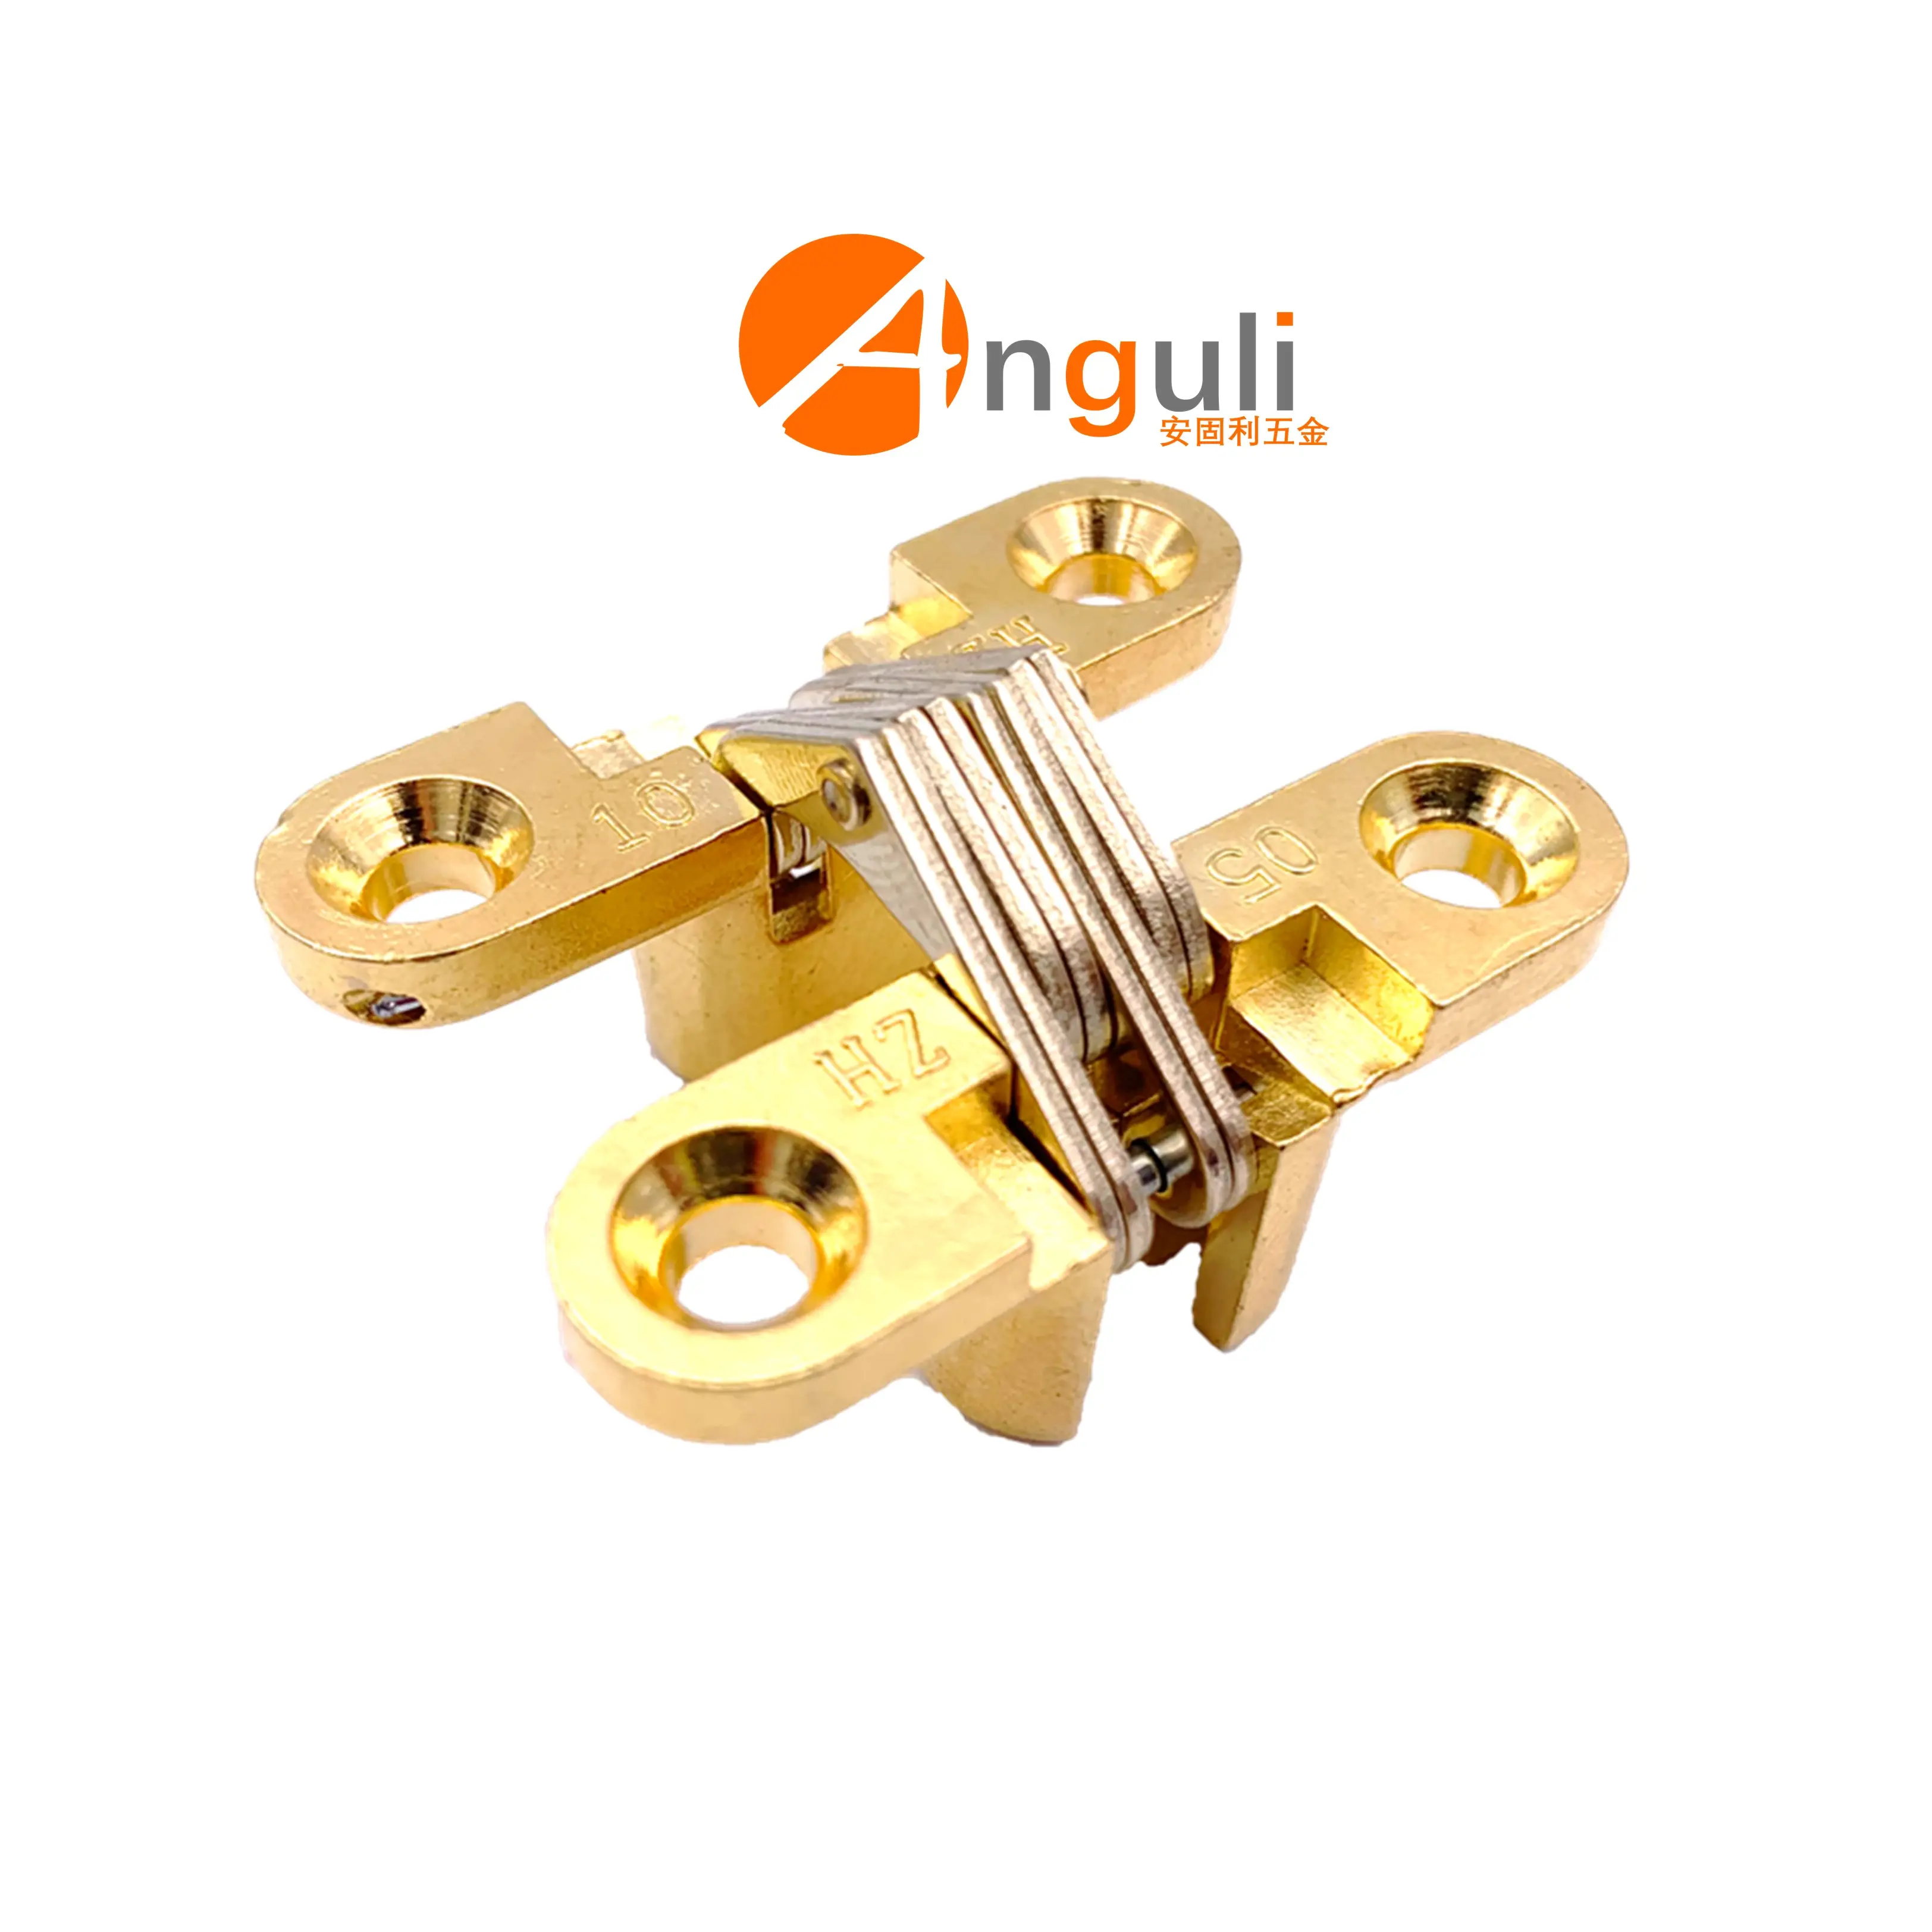 Secret Door Concealed Invisible Hinge CH-1101 Thick Cross Gold Furniture Hinge 1000pcs GB Zinc Alloy 37.7g